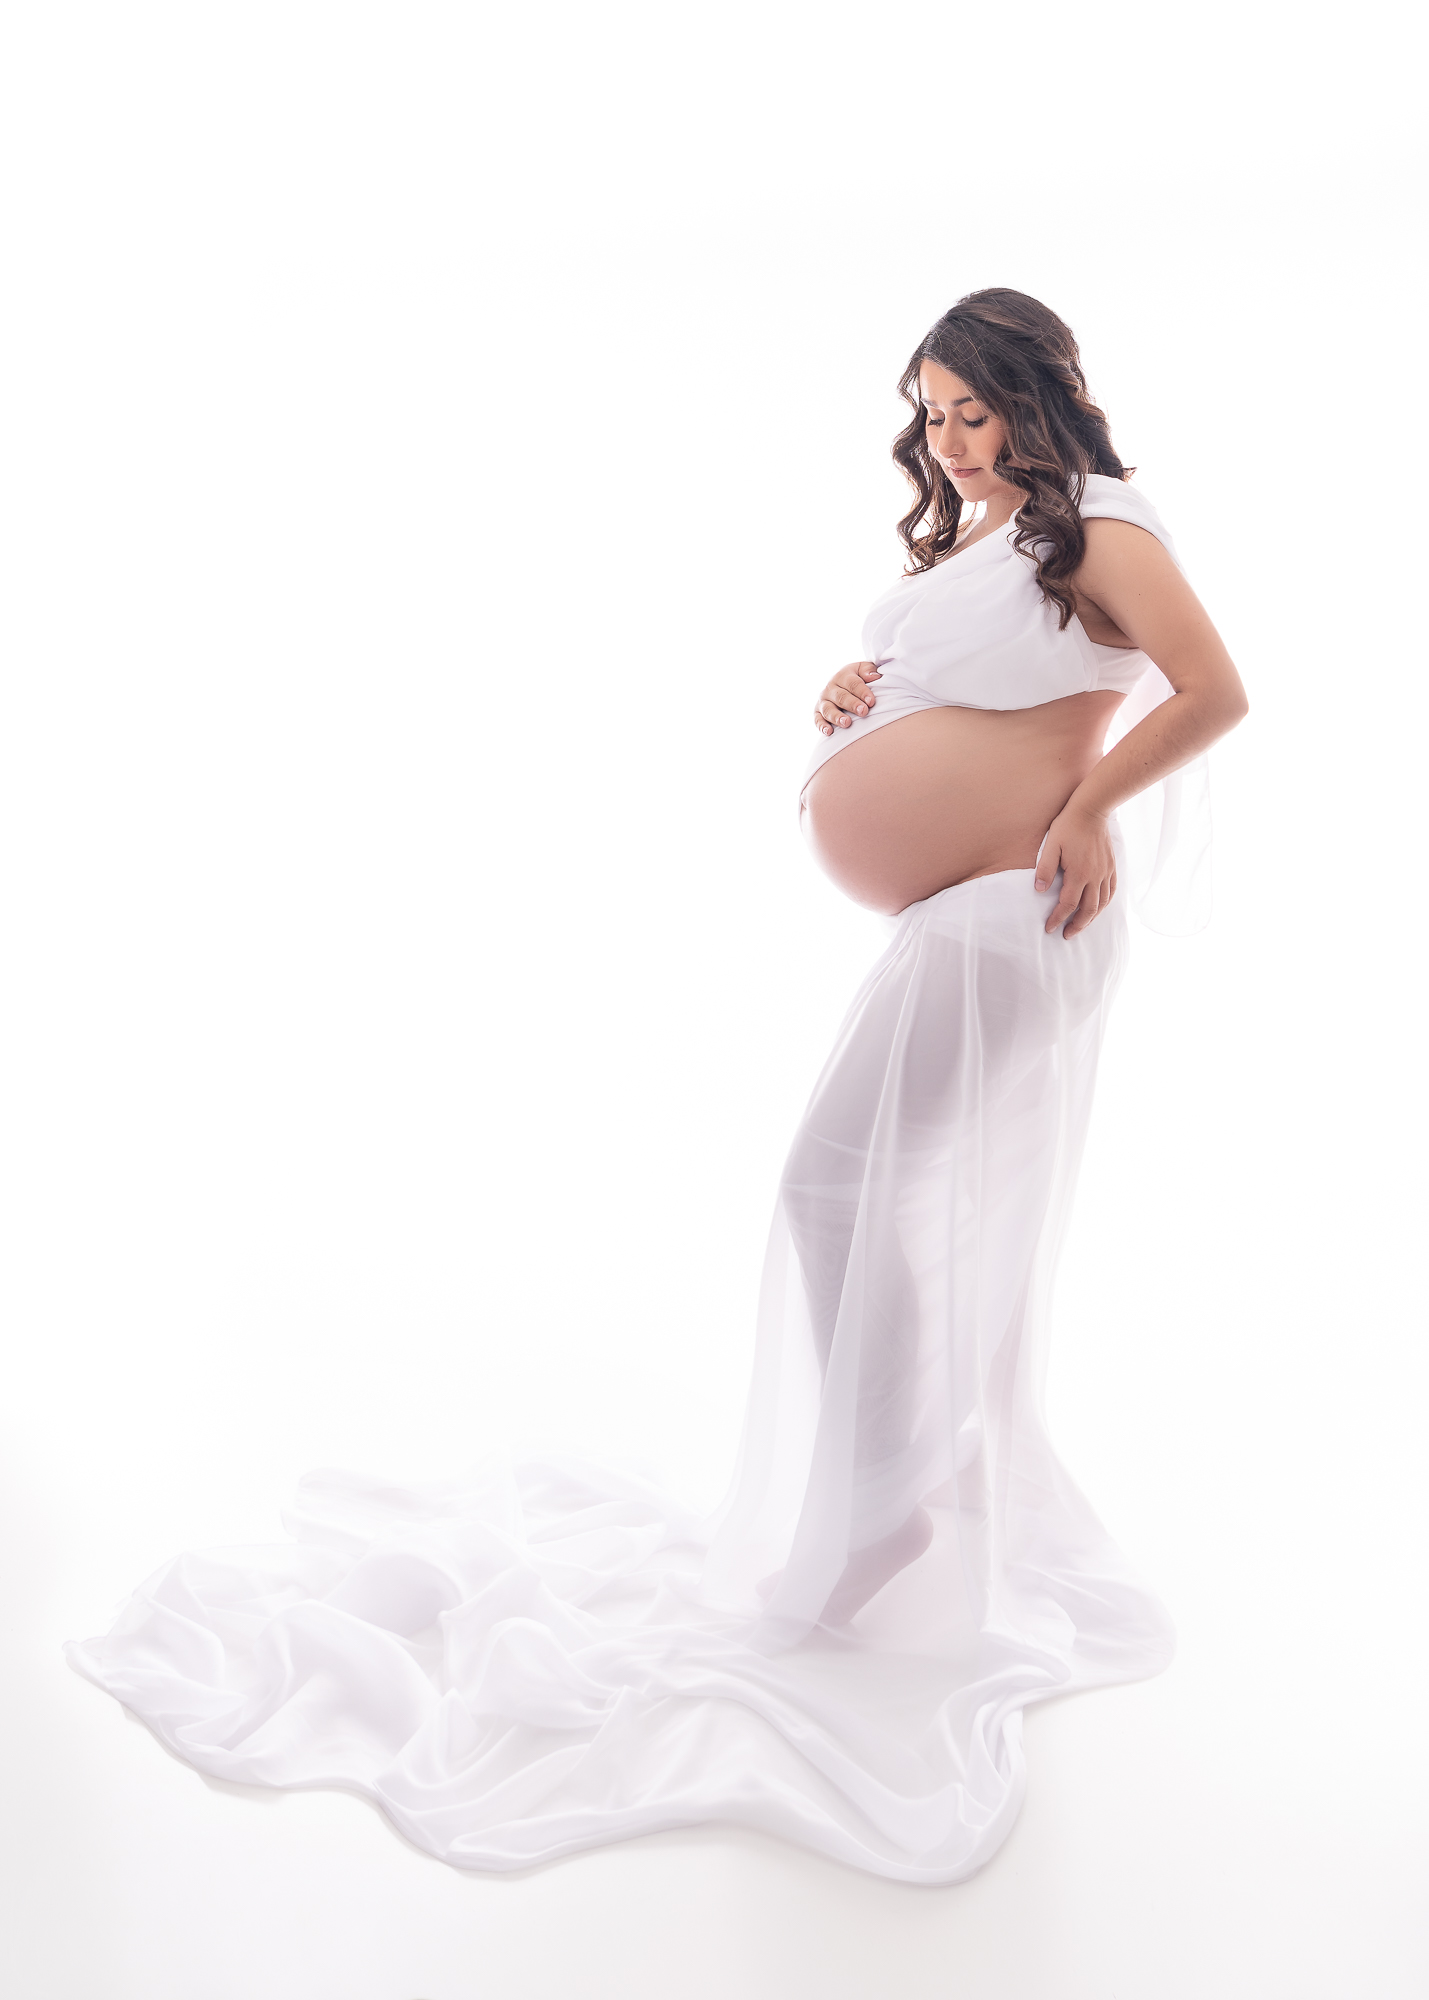 pregnant woman dressed in white top and sheer skirt, holding her belly Bend Birth Center